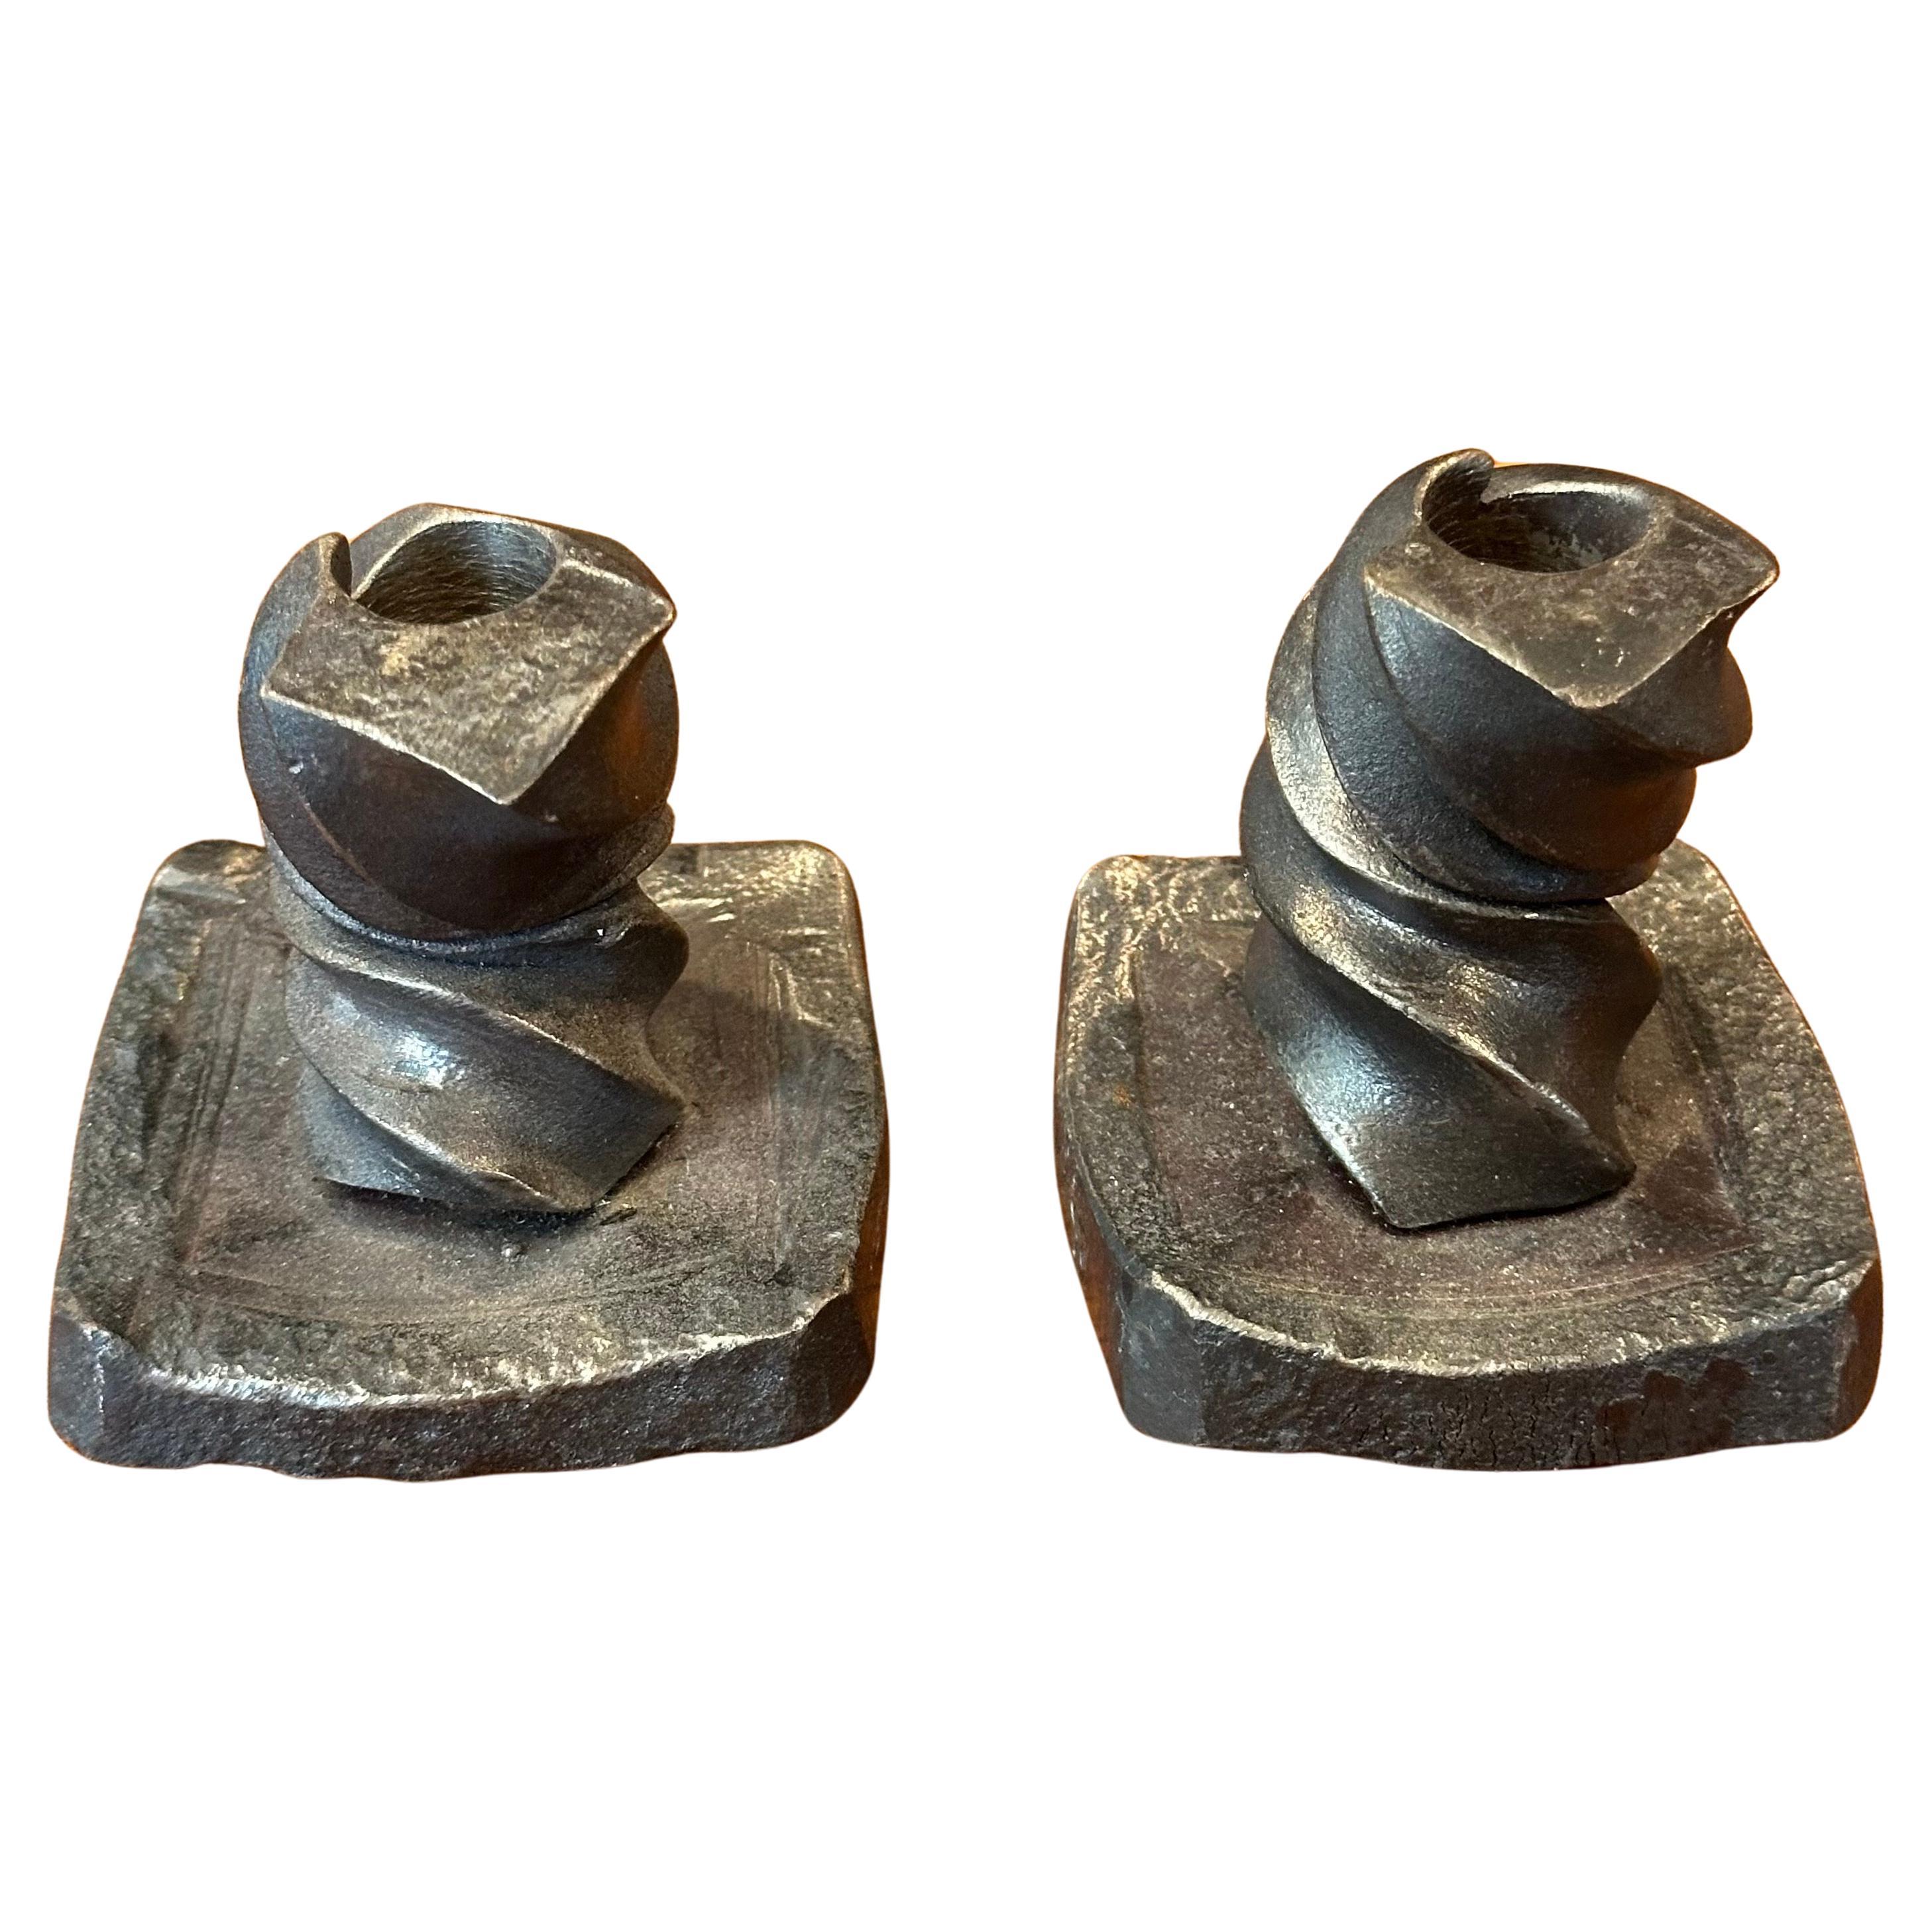 A very nice pair of signed iron brutalist candle holders, circa 1970s. The set is signed on the base 